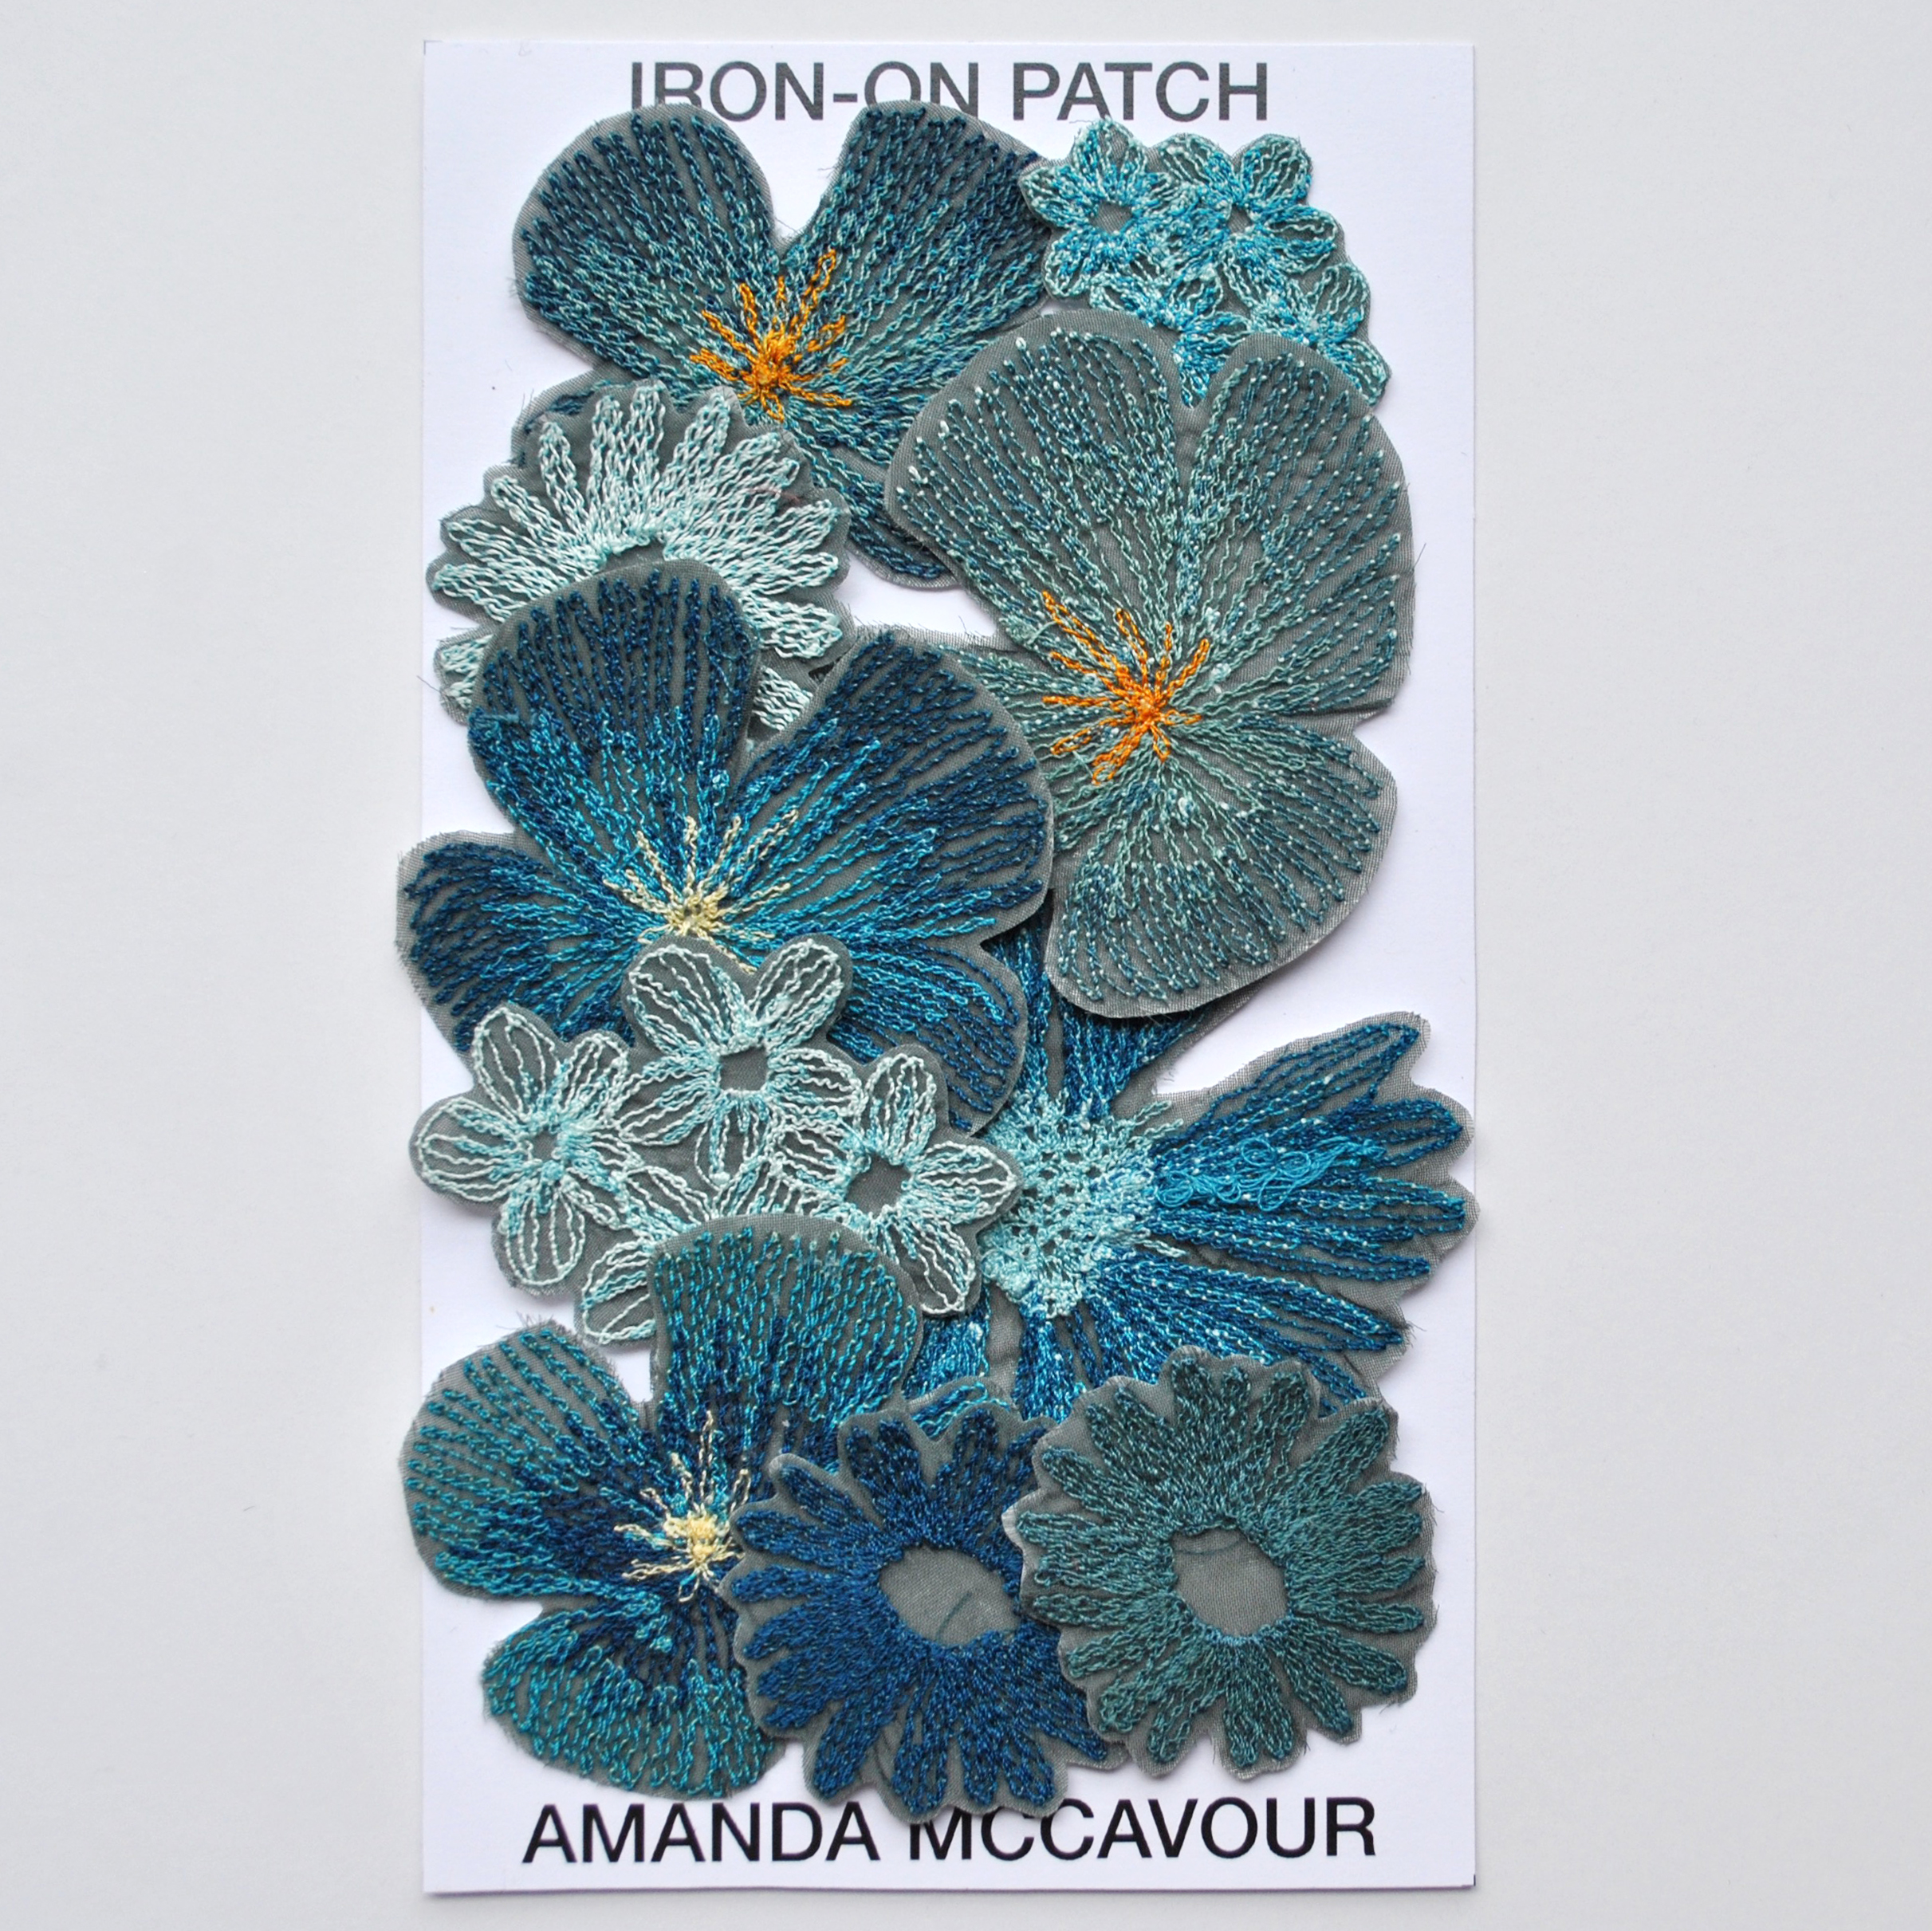 Blue Flower Patches: 10 Pack 